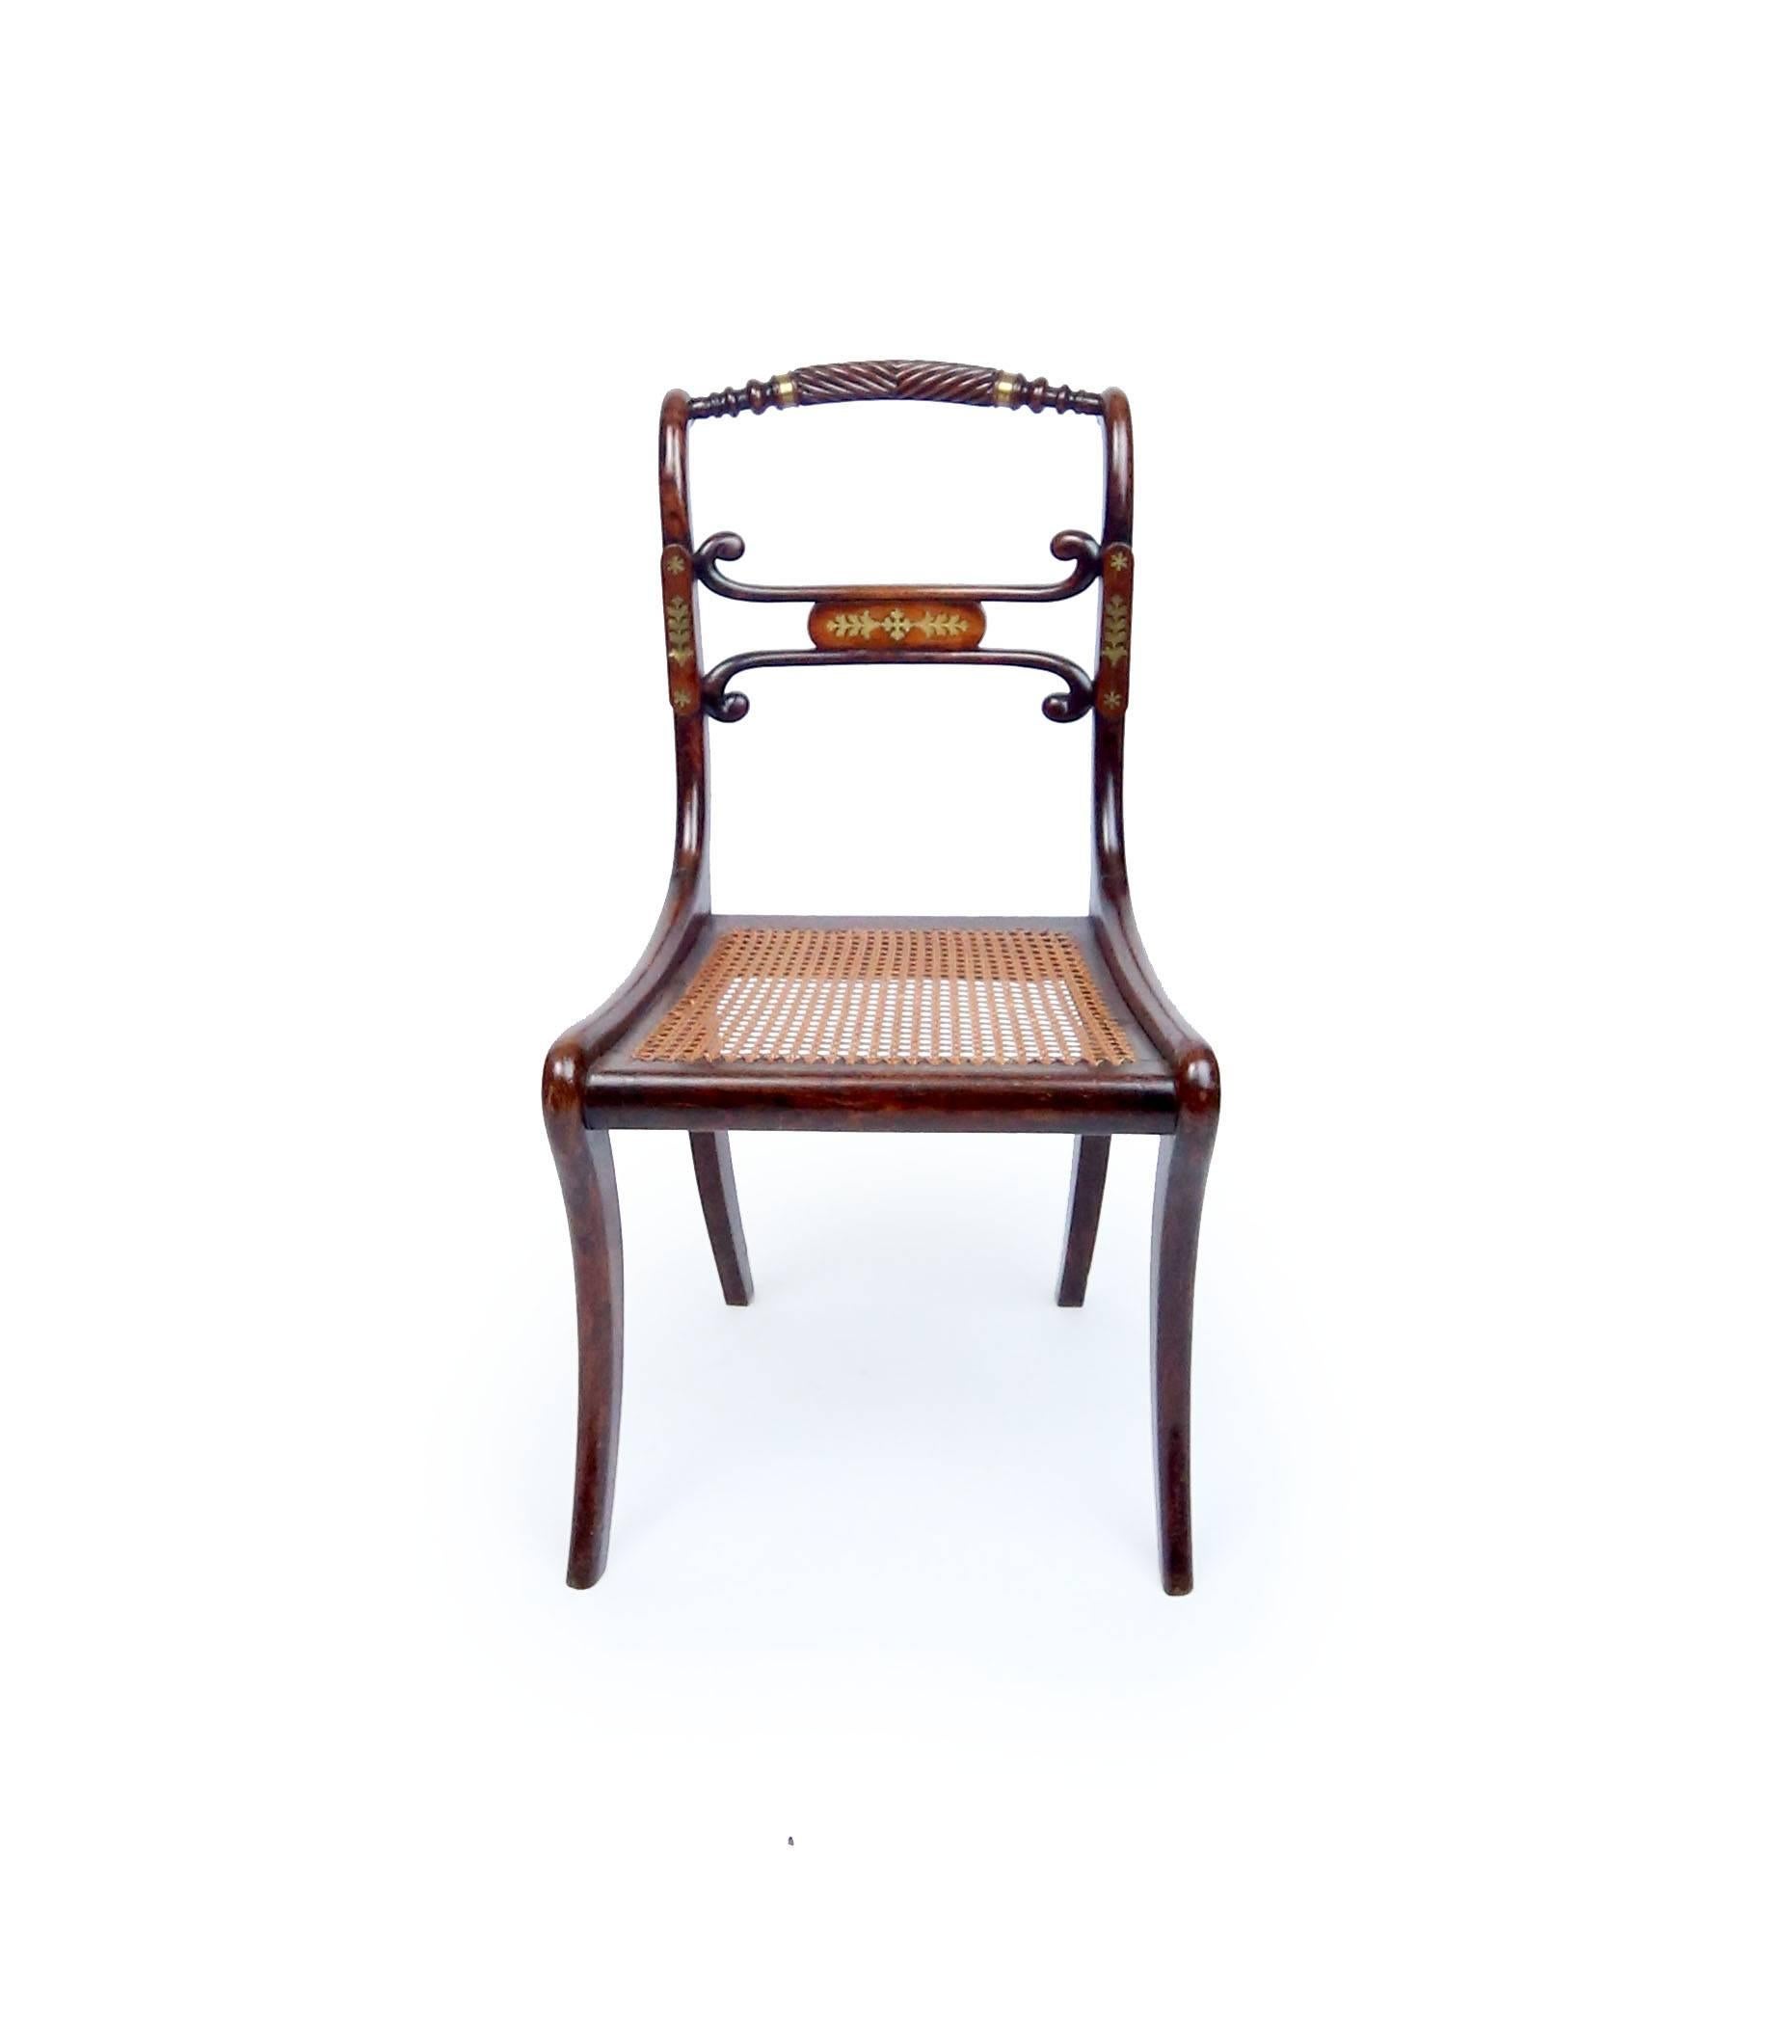 Four fine Geroge III faux painted rosewood chairs with inlaid brass details, gadrooned crest rail, and saber legs. Original caned seats, horsehair stuffed button-tufted cushions upholstered in pink silk. One chairs bears a mid-20th century sticker